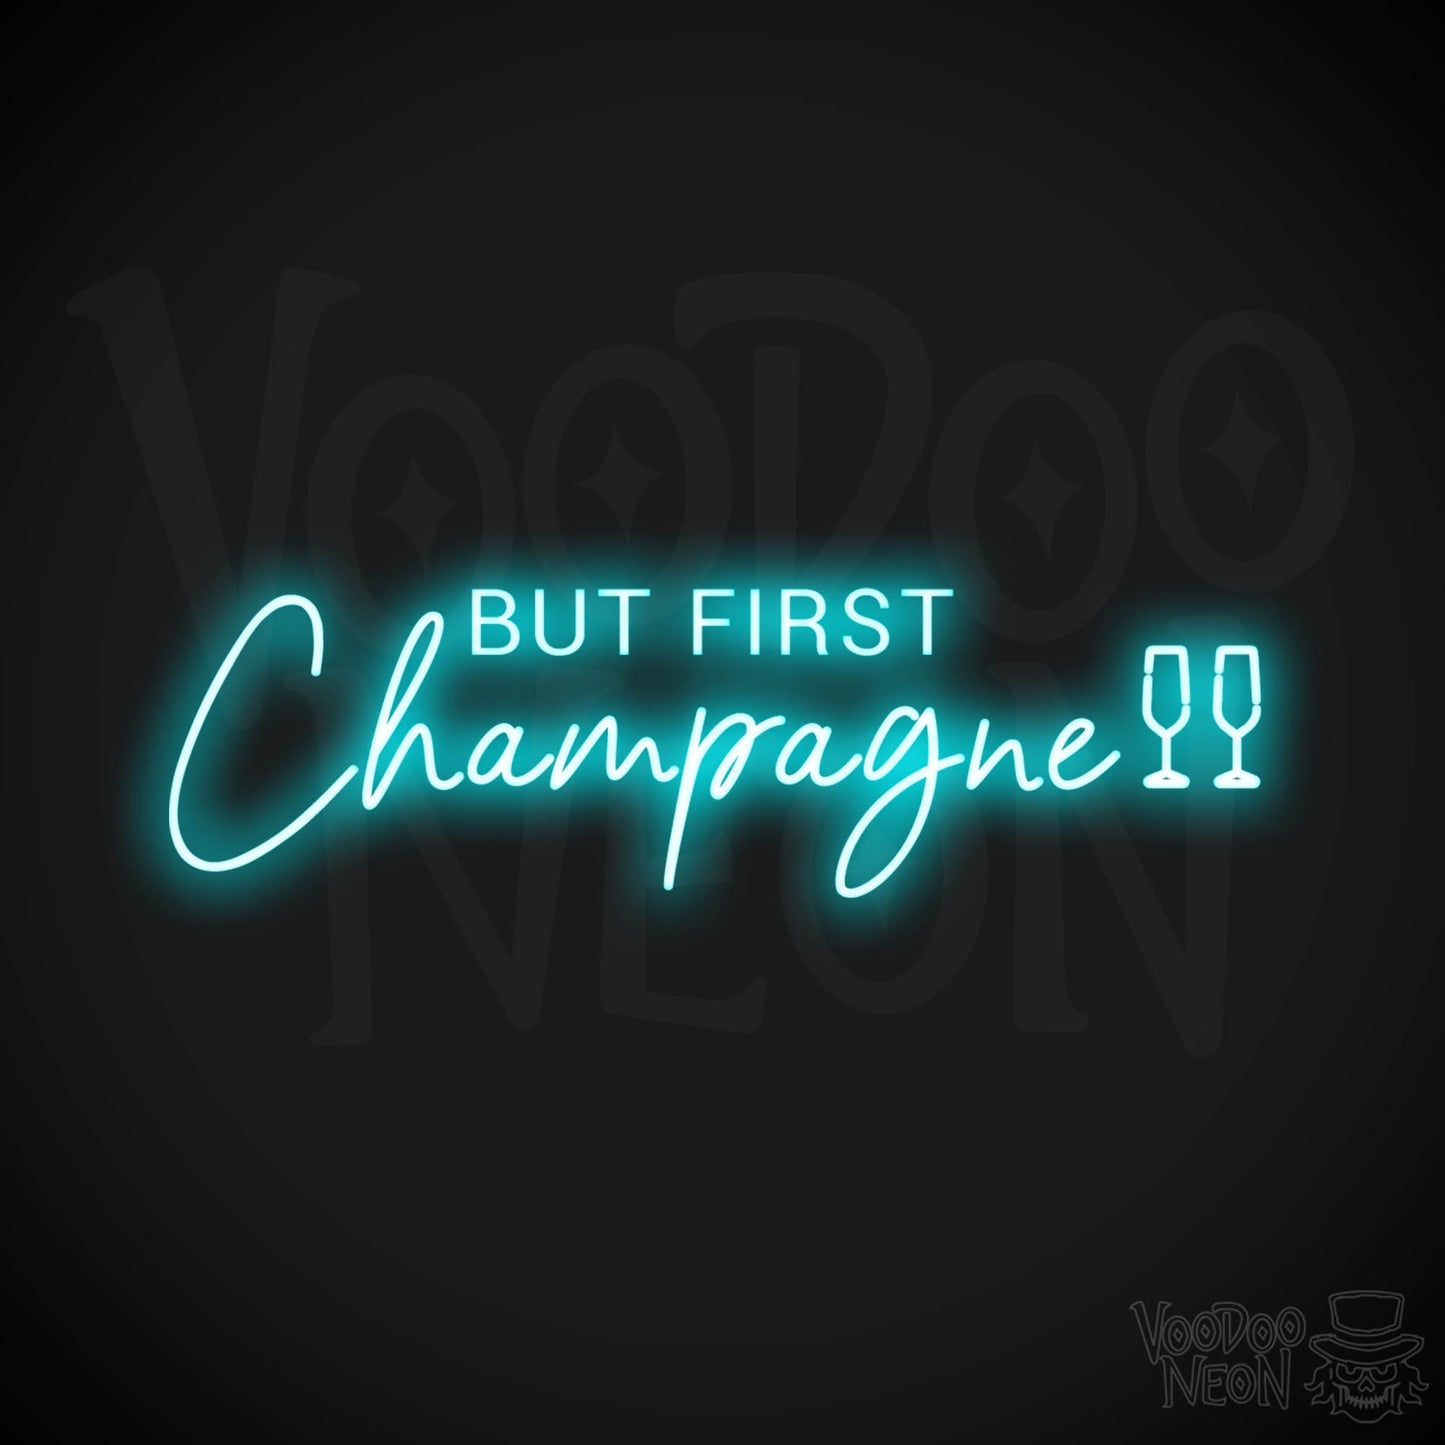 But First Champagne Neon Sign - Neon But First Champagne Sign - Neon Wall Art - Color Ice Blue